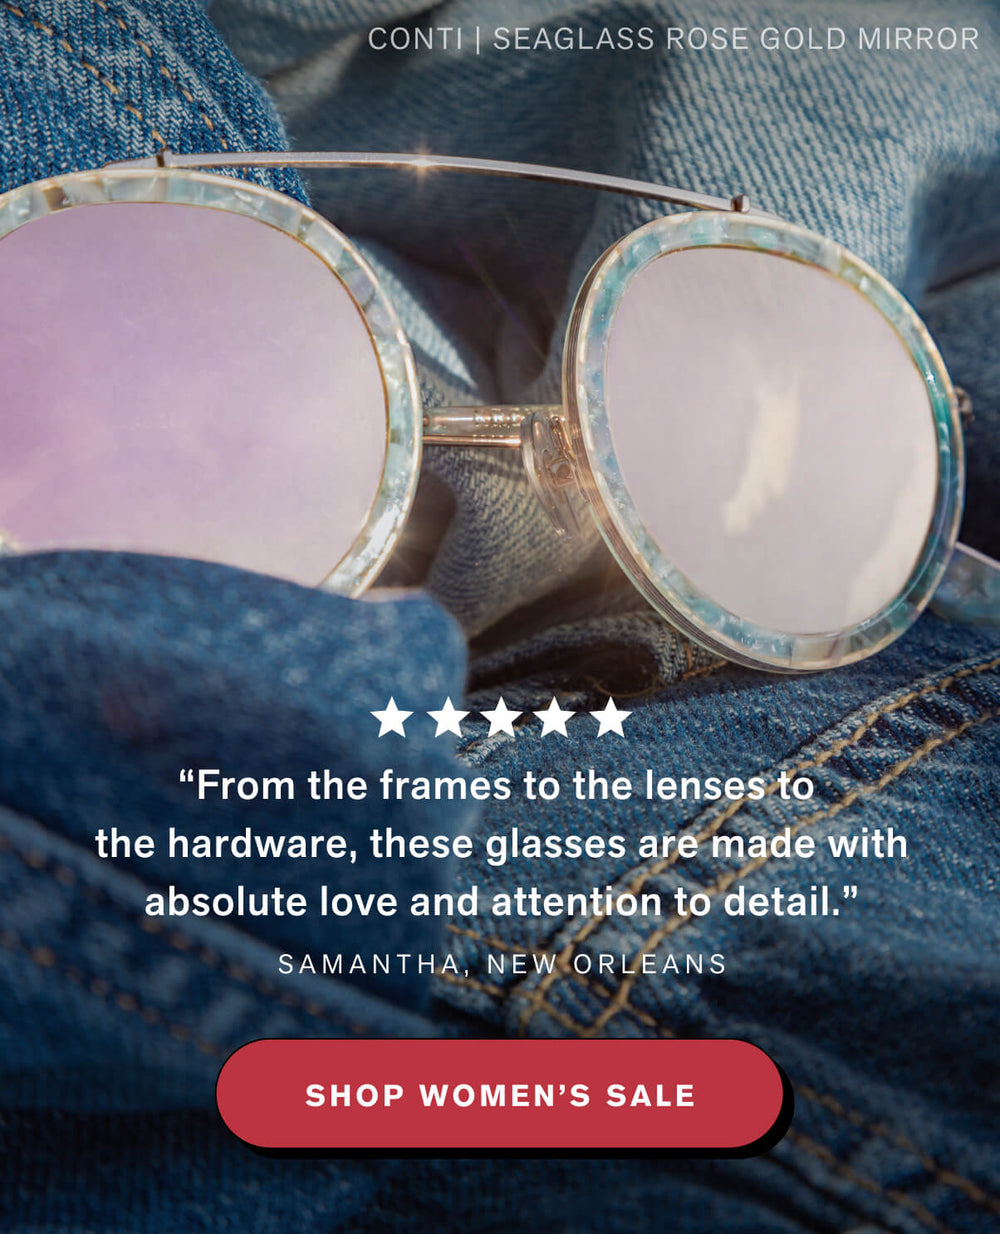 REVIEW: “From the frames to the lenses to the hardware, these glasses are made with absolute love and attention to detail.” Samantha, New Orleans  SHOP WOMEN'S SALE